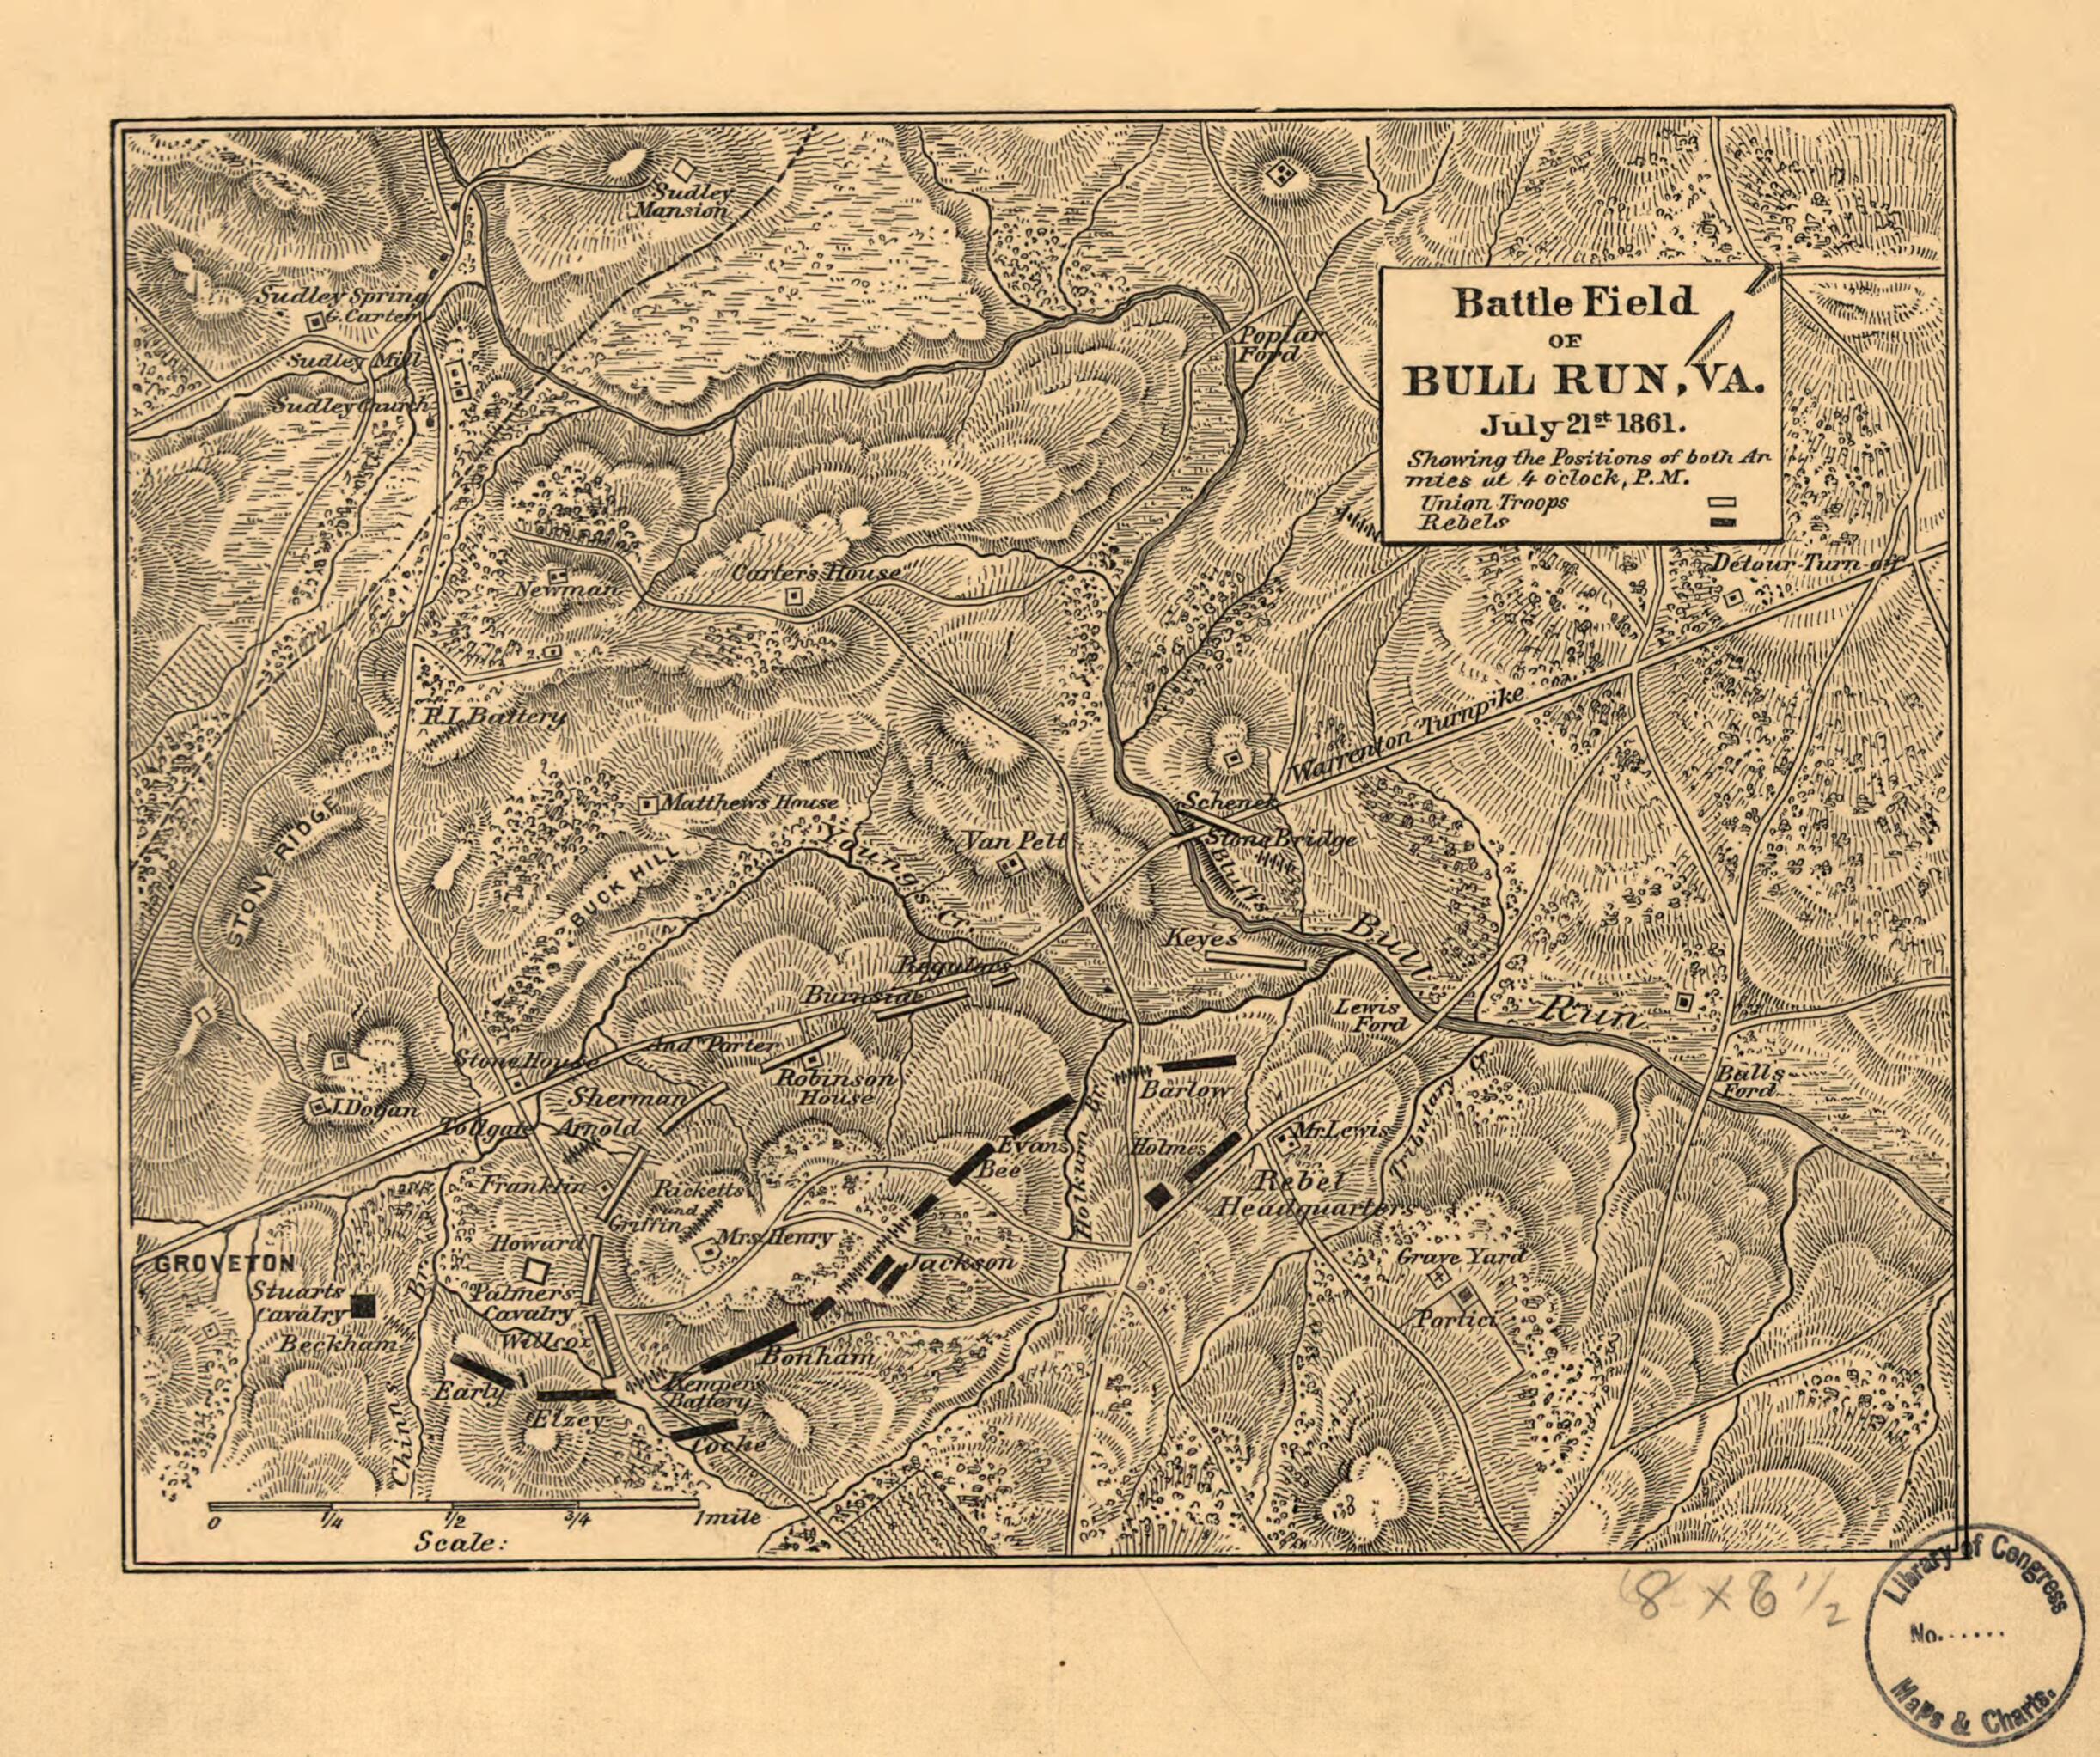 This old map of Battle Field of Bull Run, Va. July 21st from 1861. Showing the Positions of Both Armies at 4 O&